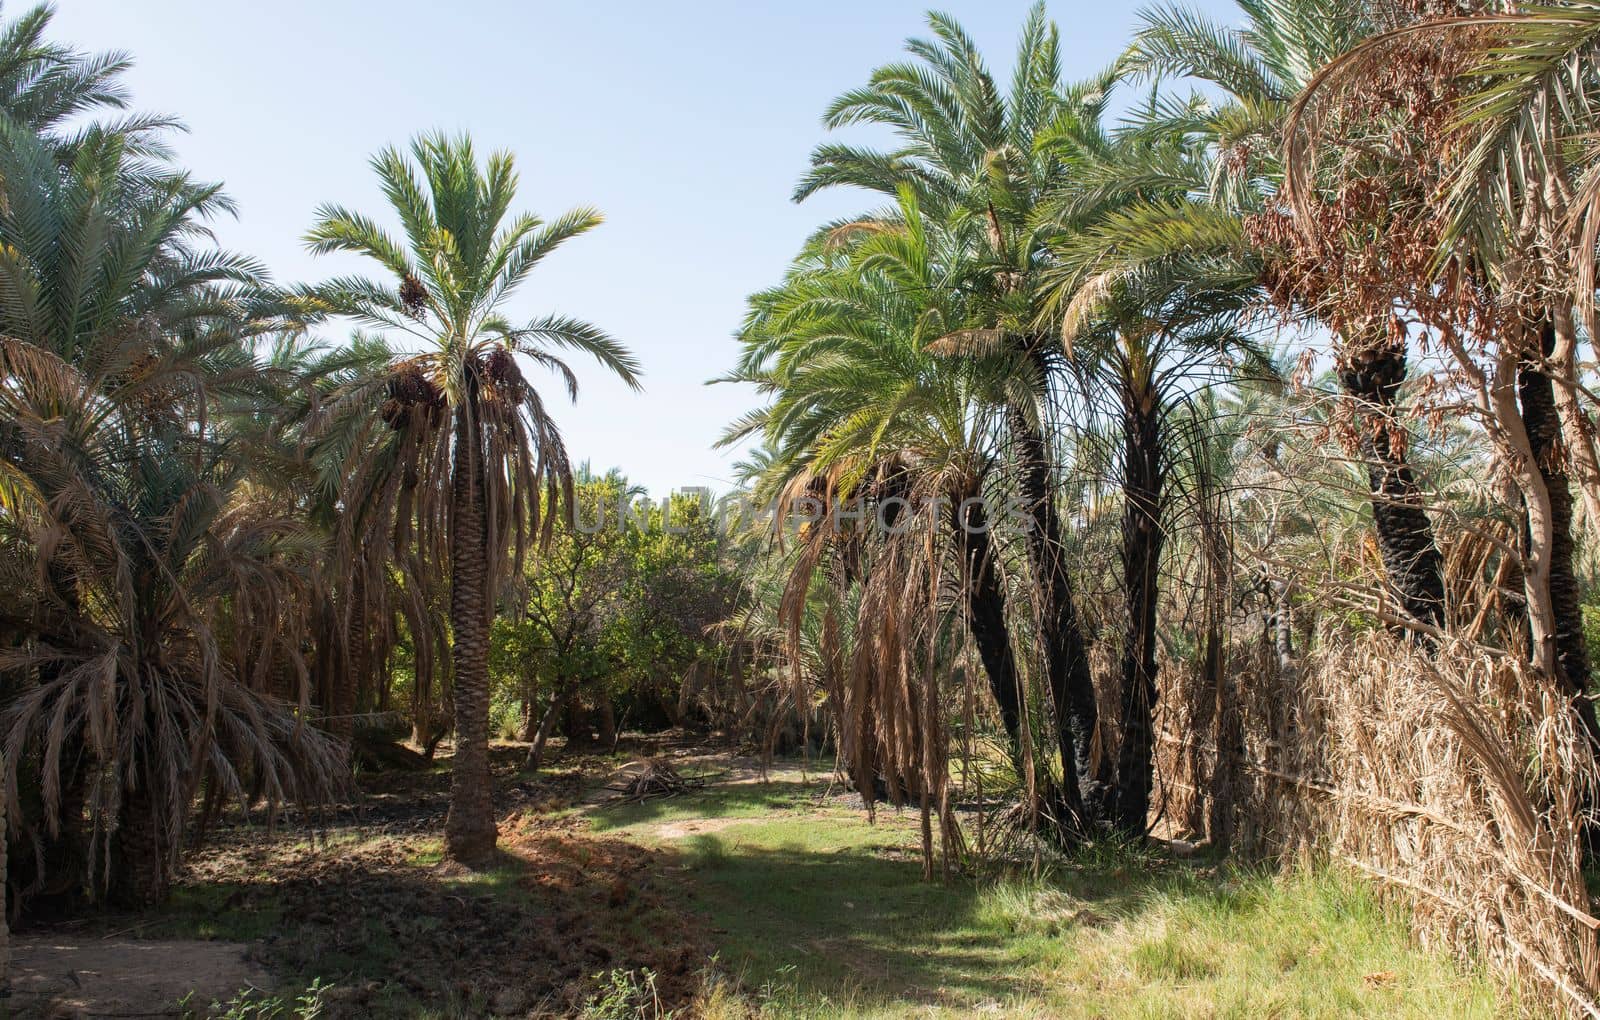 Grass track through rural african countryside egyptian date palm tree farm in remote village